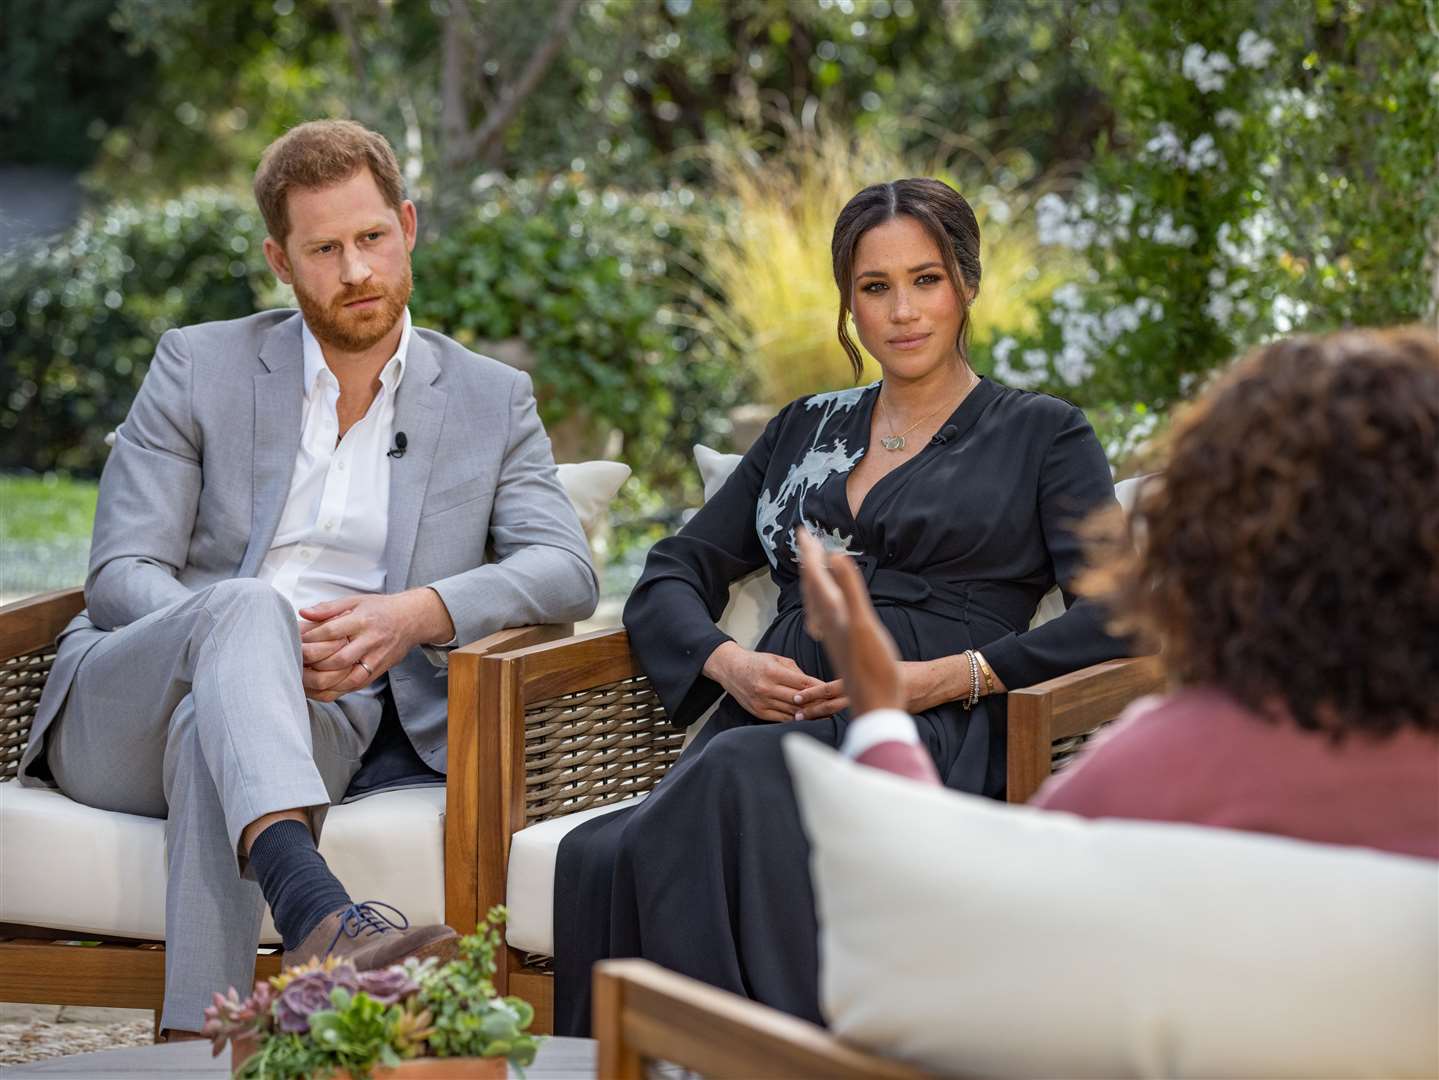 The Duke and Duchess of Sussex sat down with Oprah Winfrey for a highly anticipated interview (Joe Pugliese/Harpo Productions/PA)